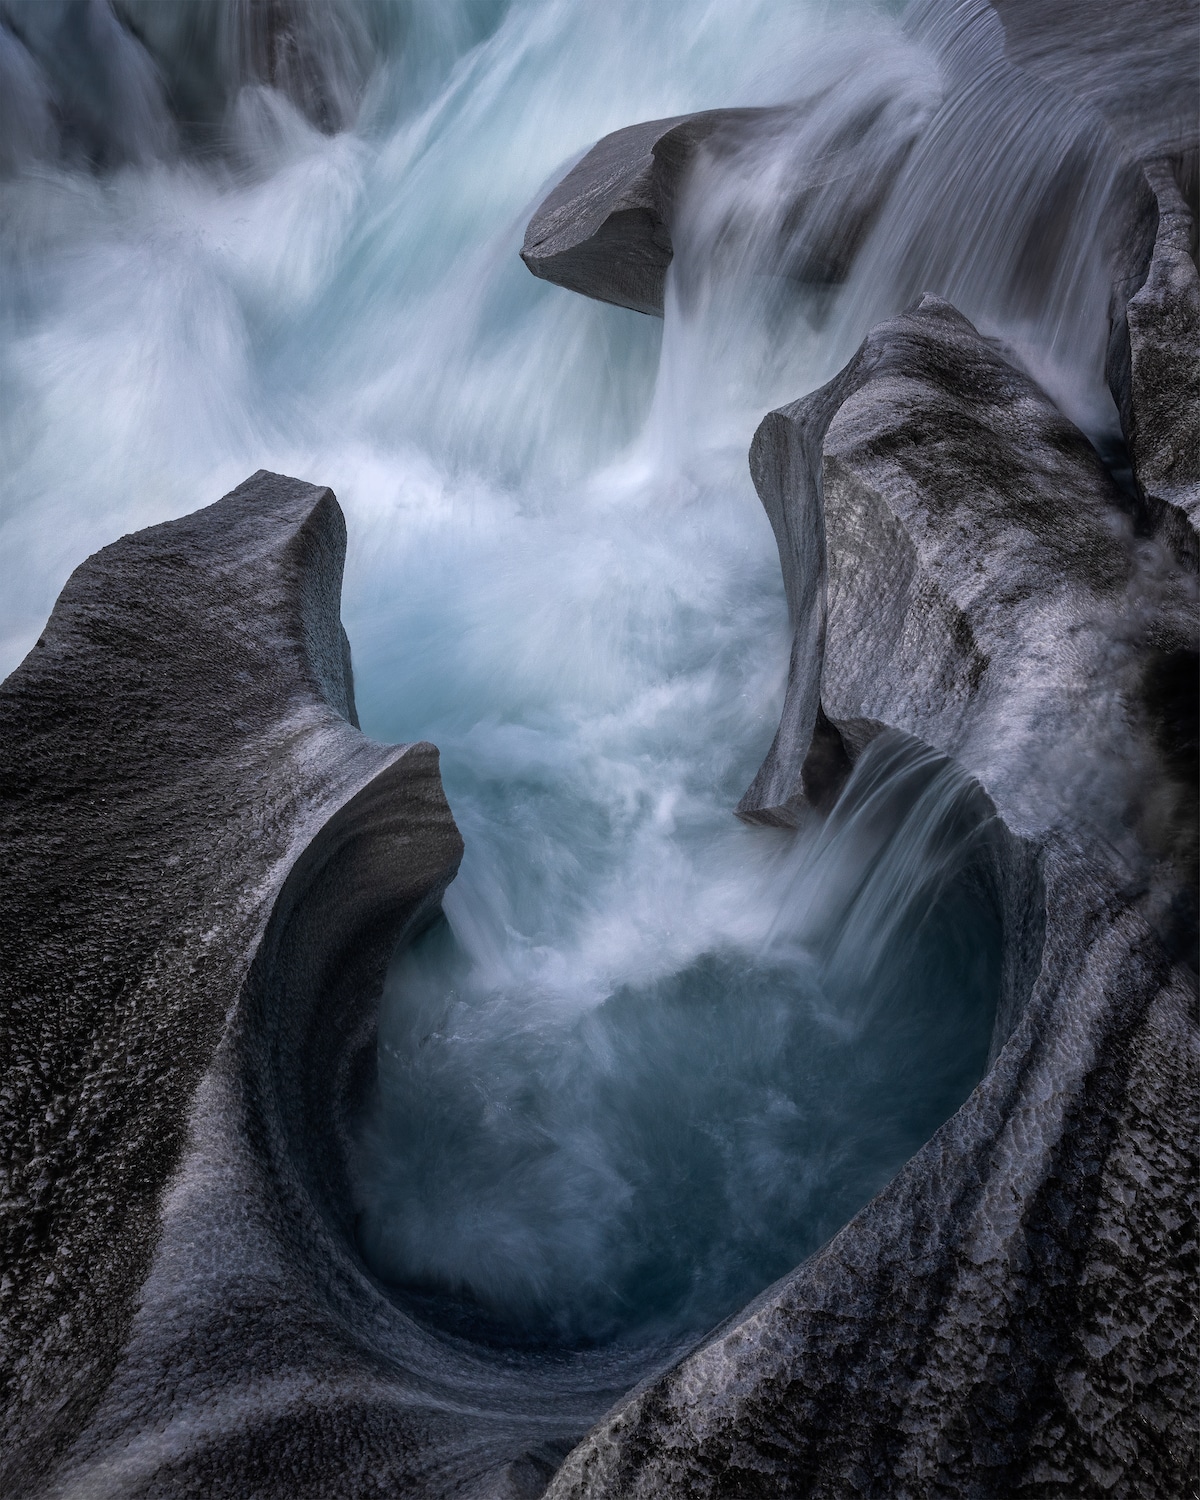 Water Flowing Through Rock Formations in Norway